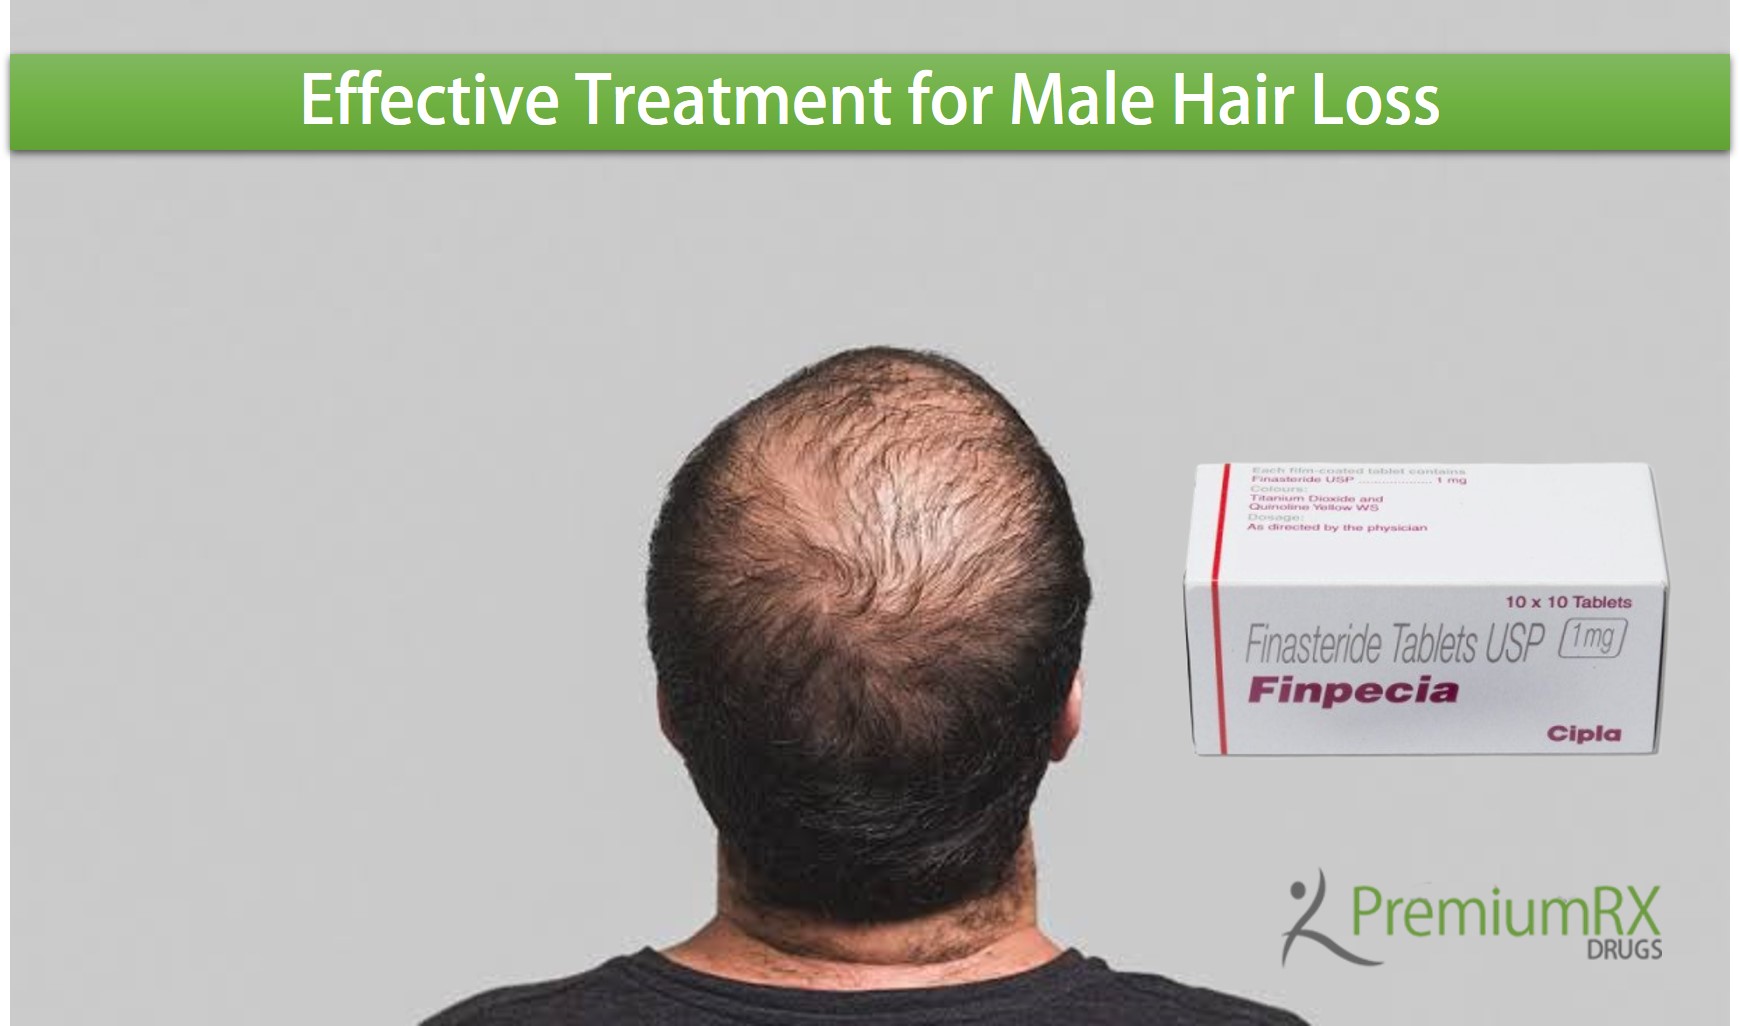 Use of Finpecia 1mg Tablets for Hair Loss